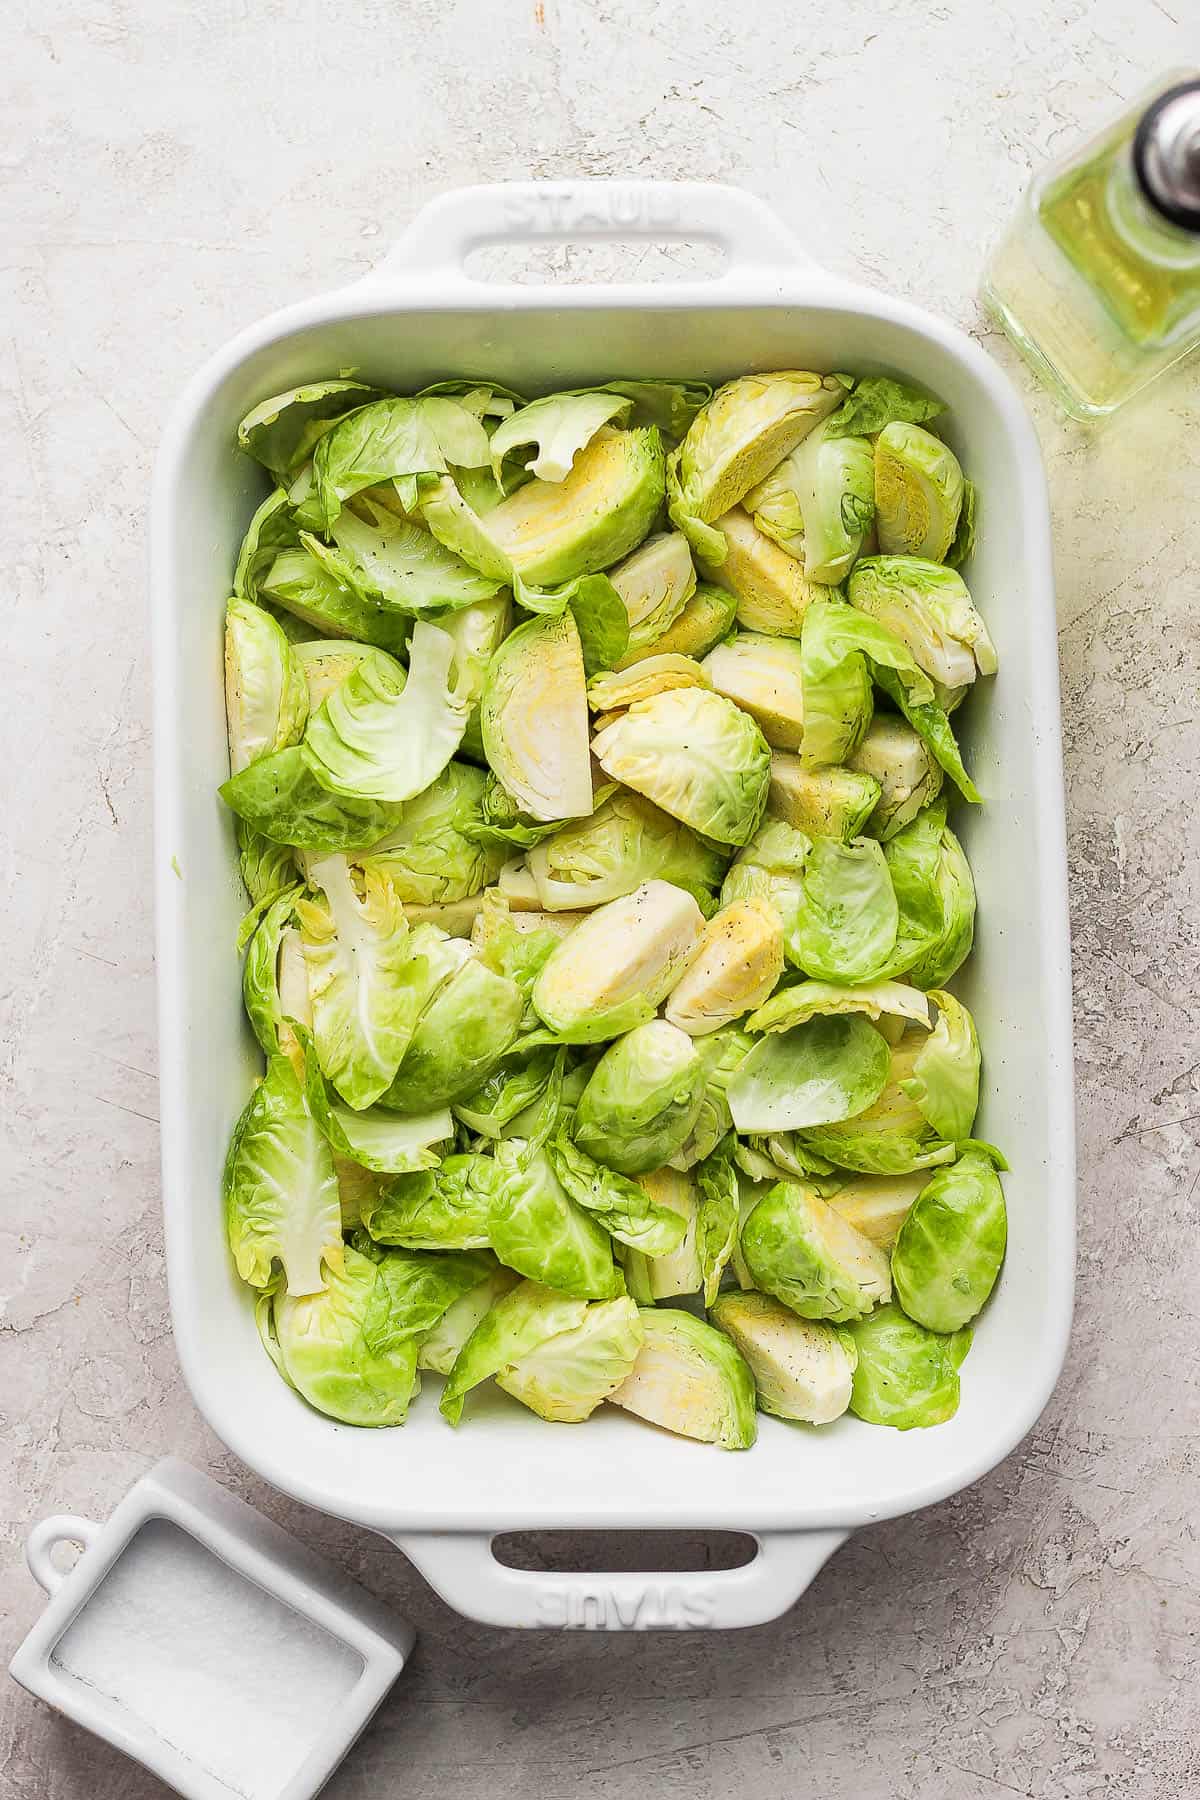 Peeled and quartered brussels sprouts in a casserole dish drizzled with olive oil and salt and pepper.